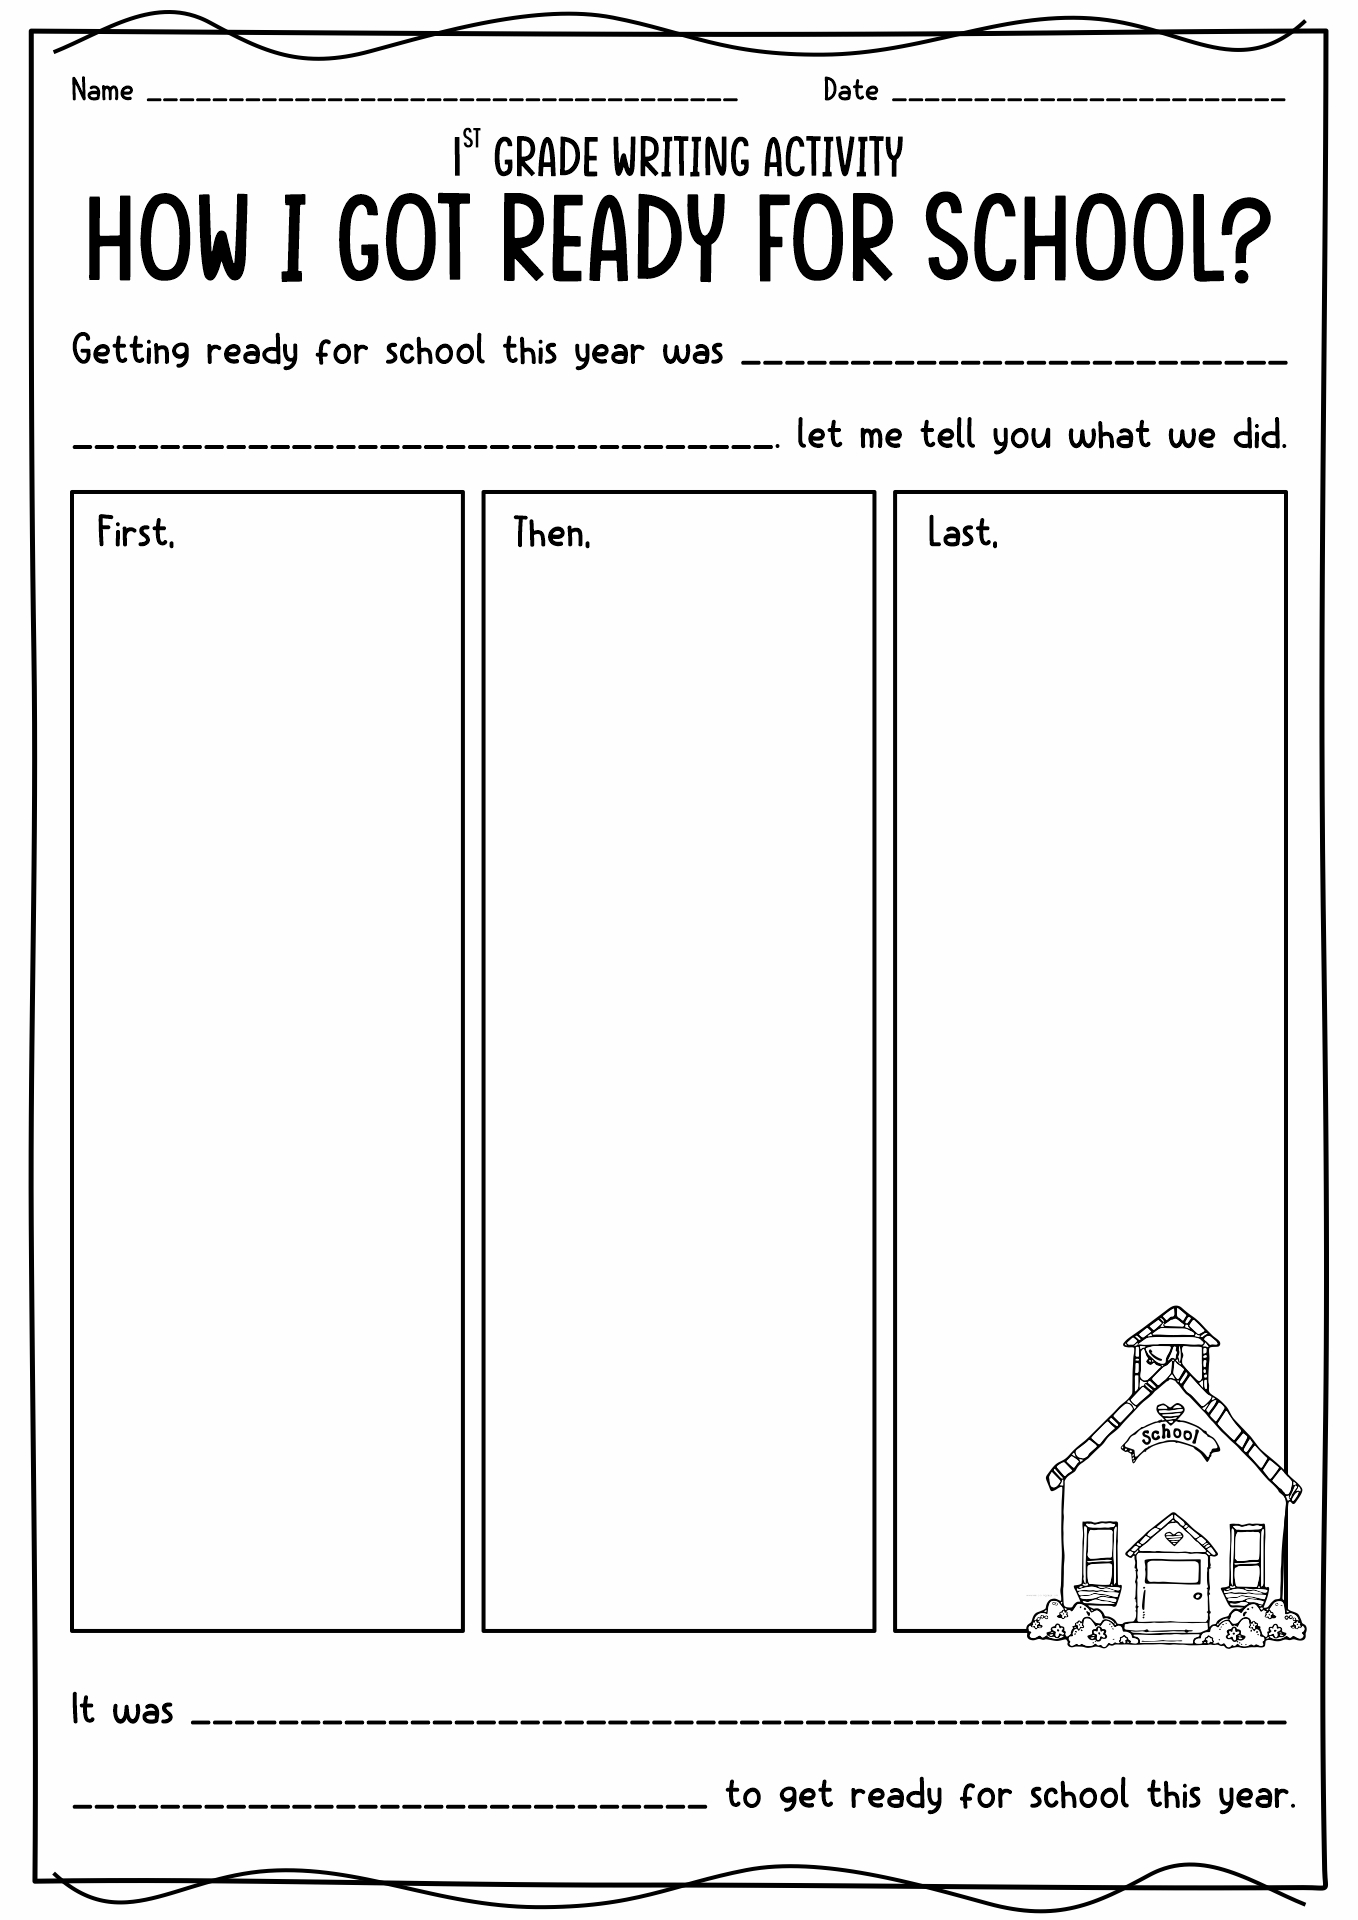 Back to School 1st Grade Writing Activity